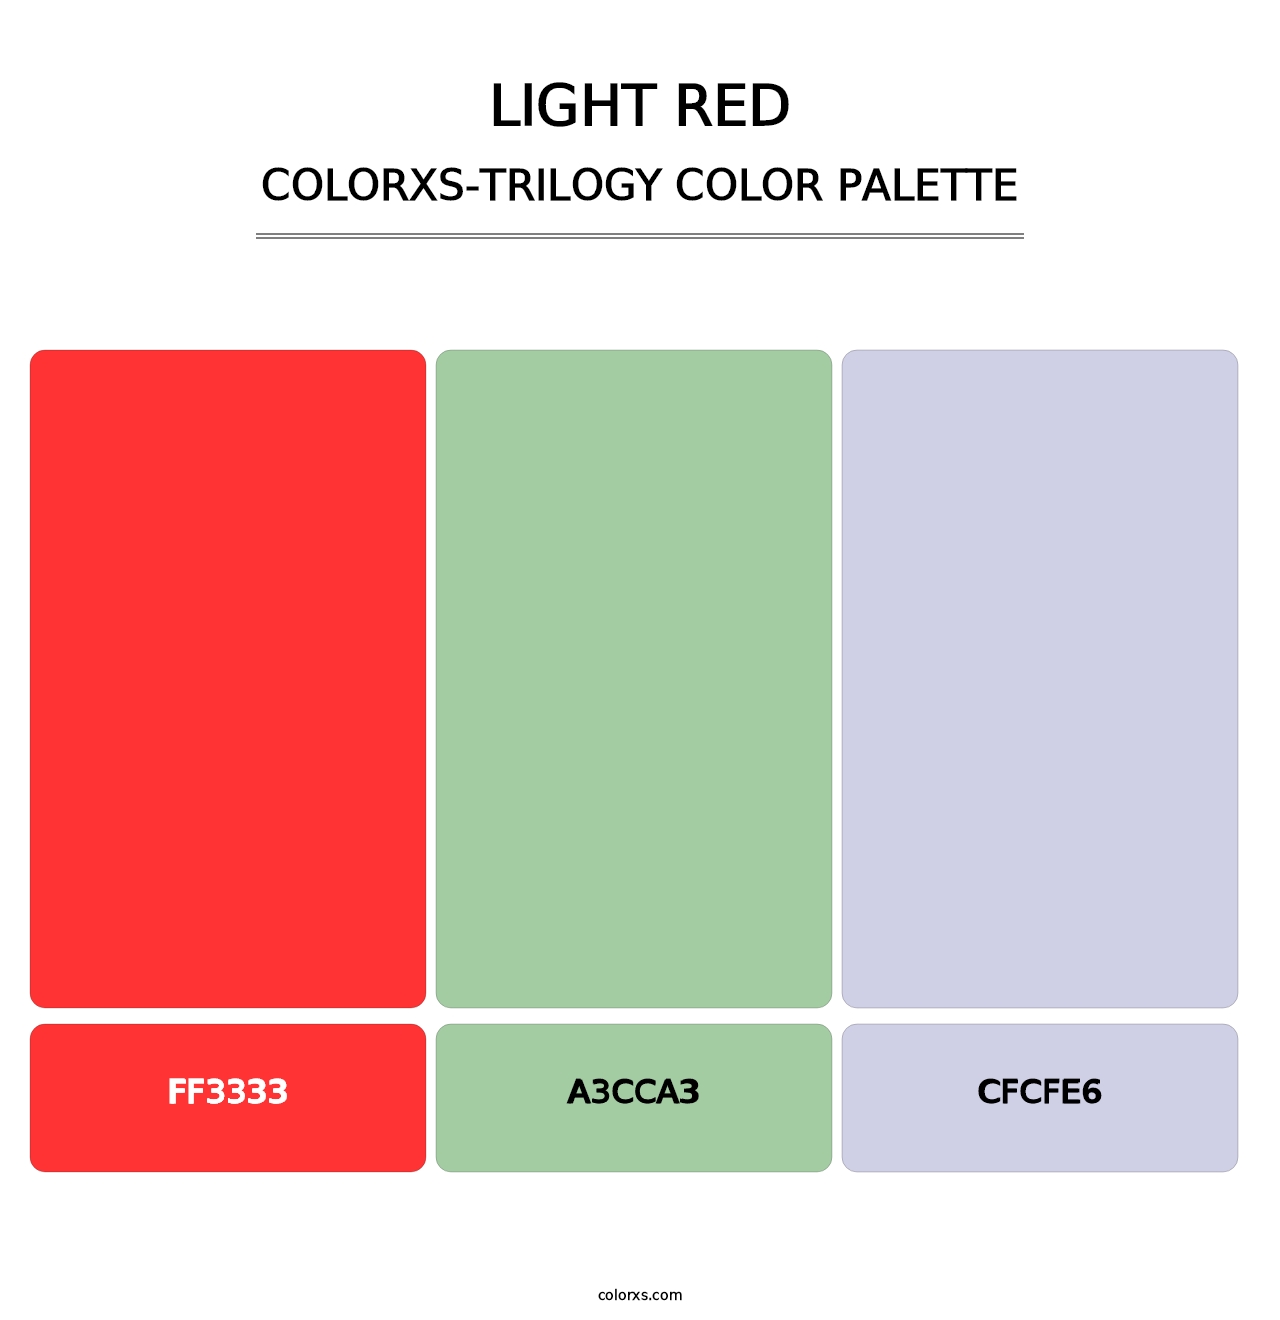 Light Red - Colorxs Trilogy Palette